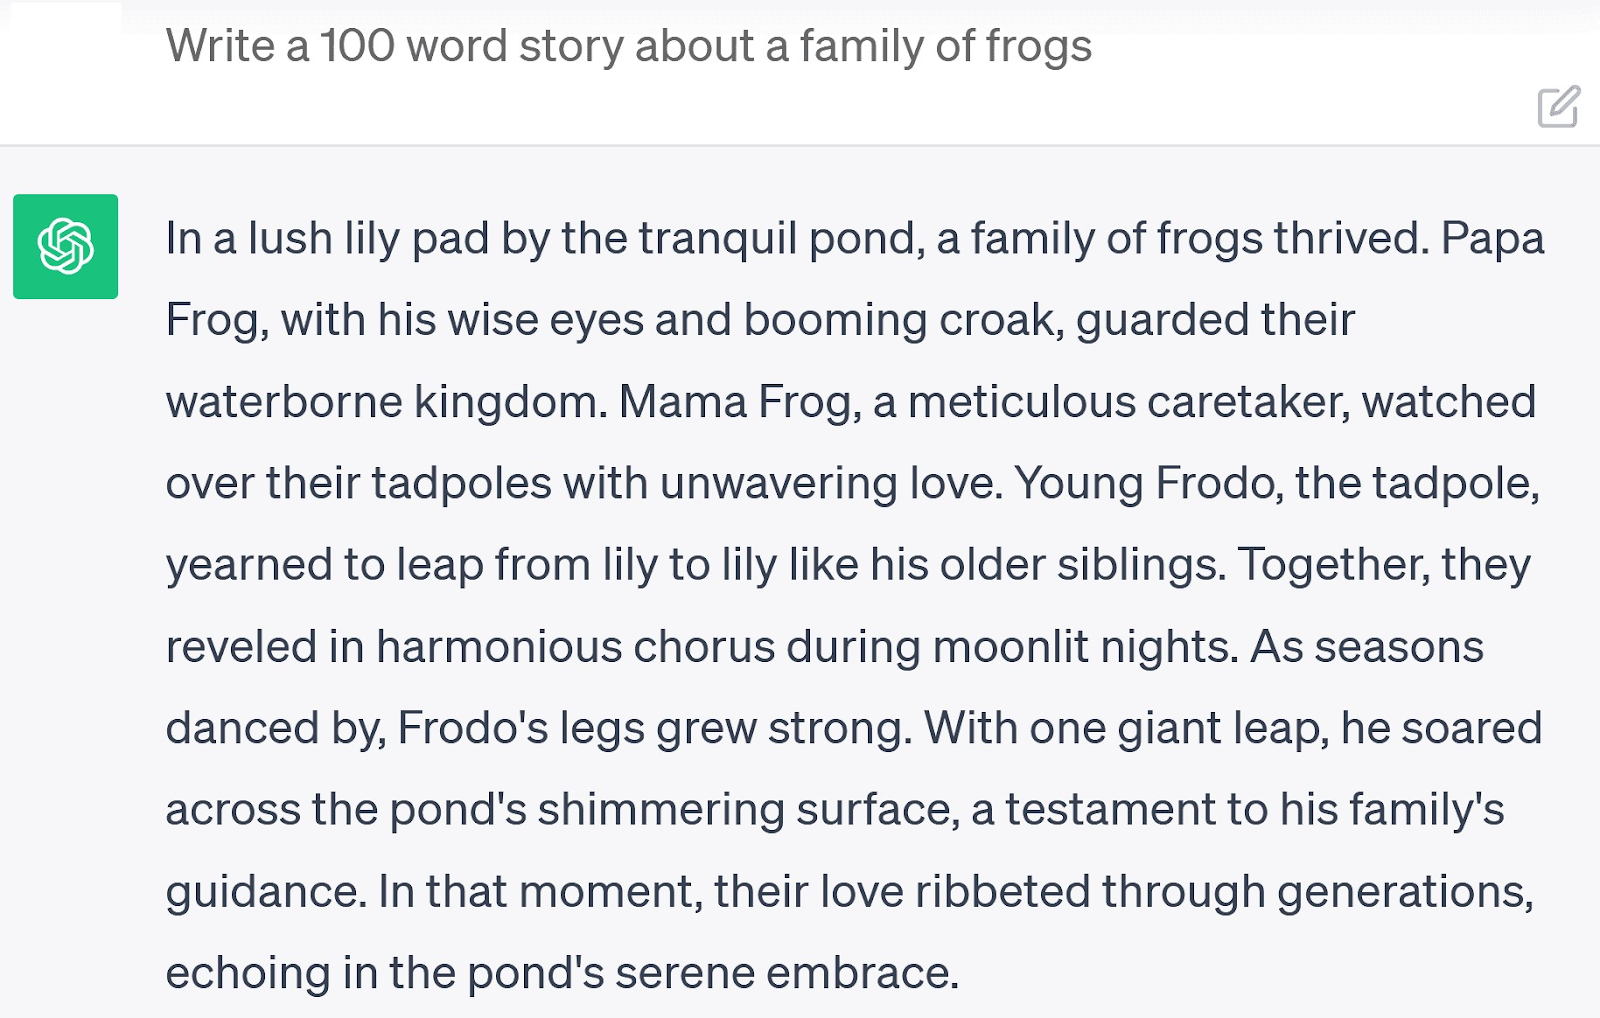 ChatGPT’s response to "Write a 100 word story about a family of frogs" prompt